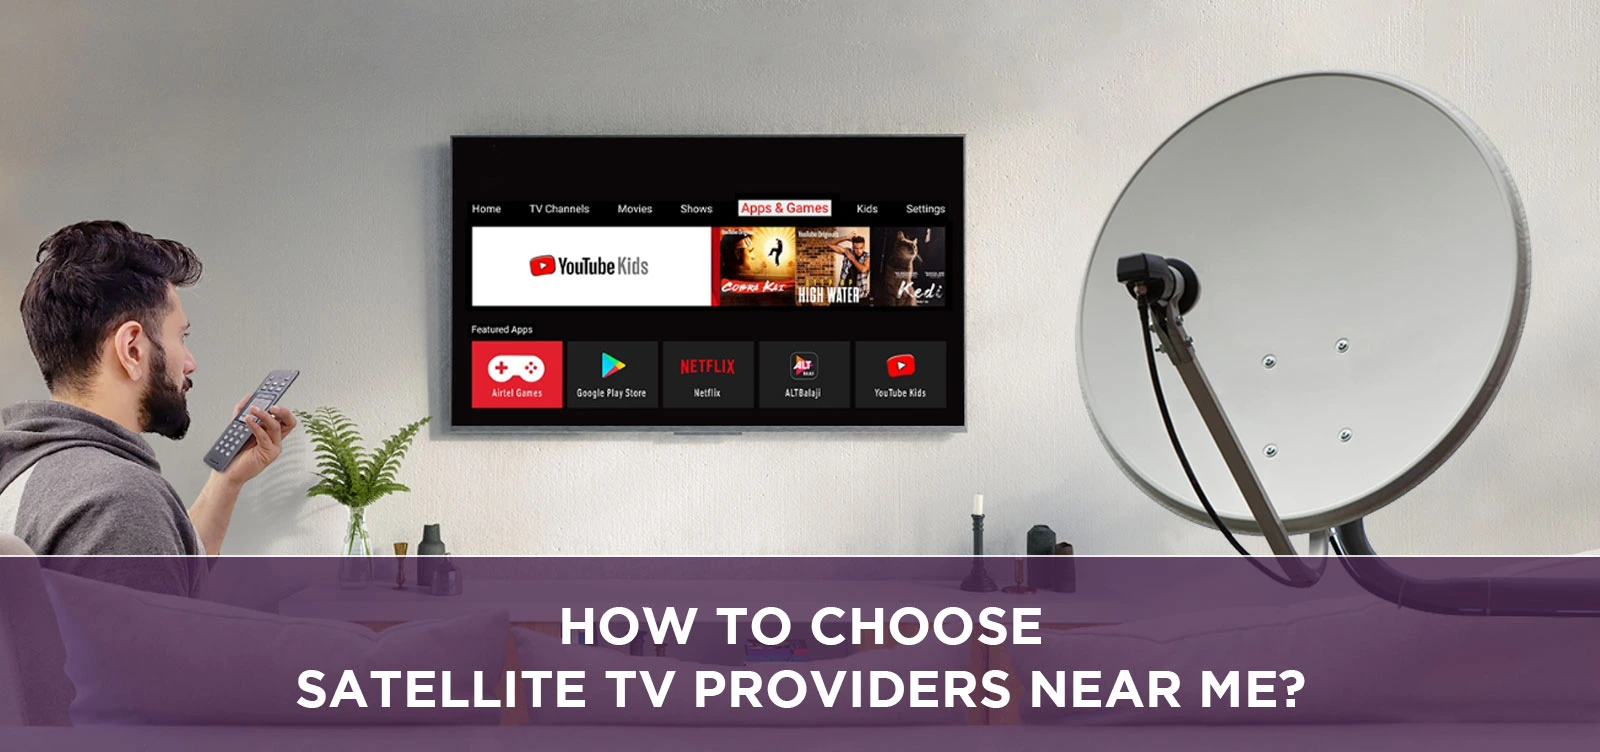 How to Choose Satellite TV Providers Near Me?